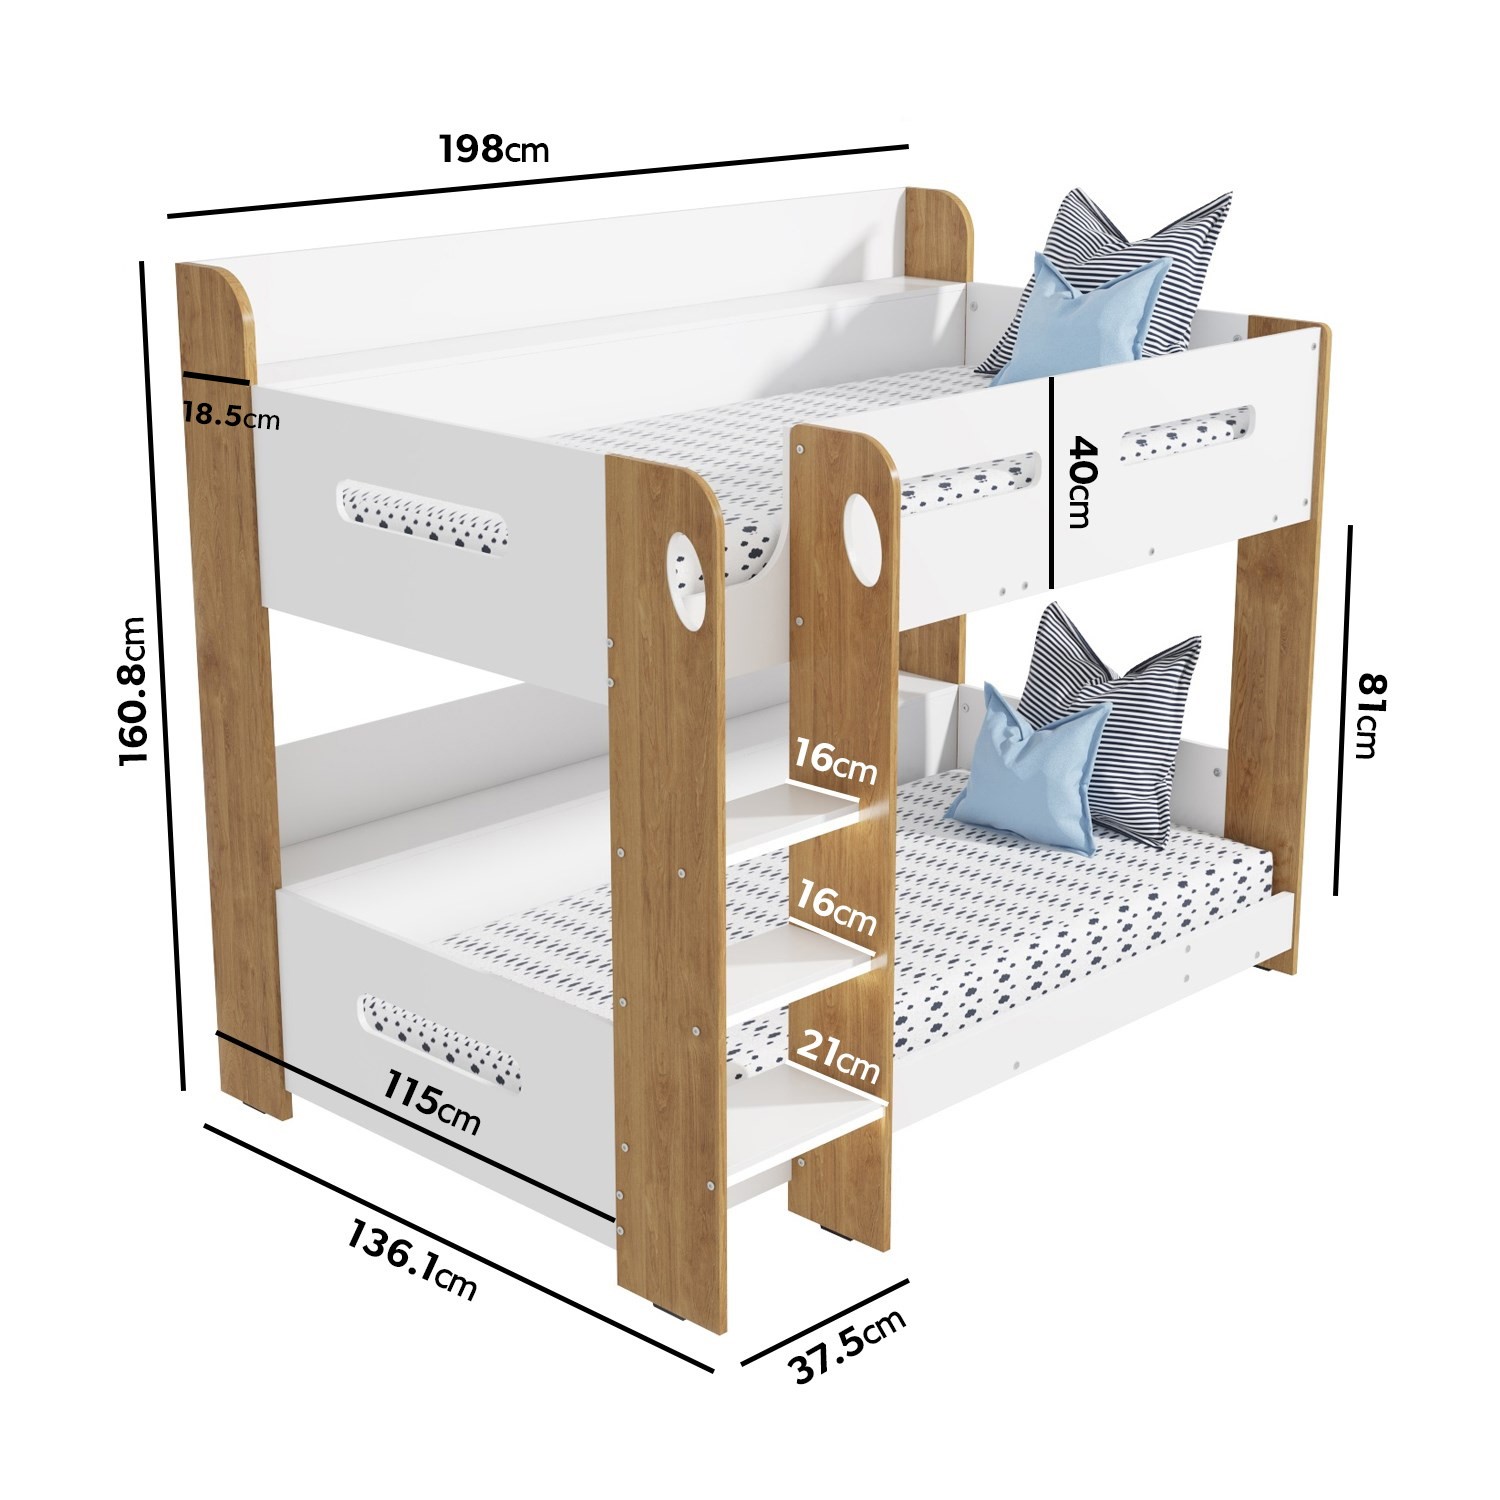 Read more about White and oak bunk bed with shelves sky